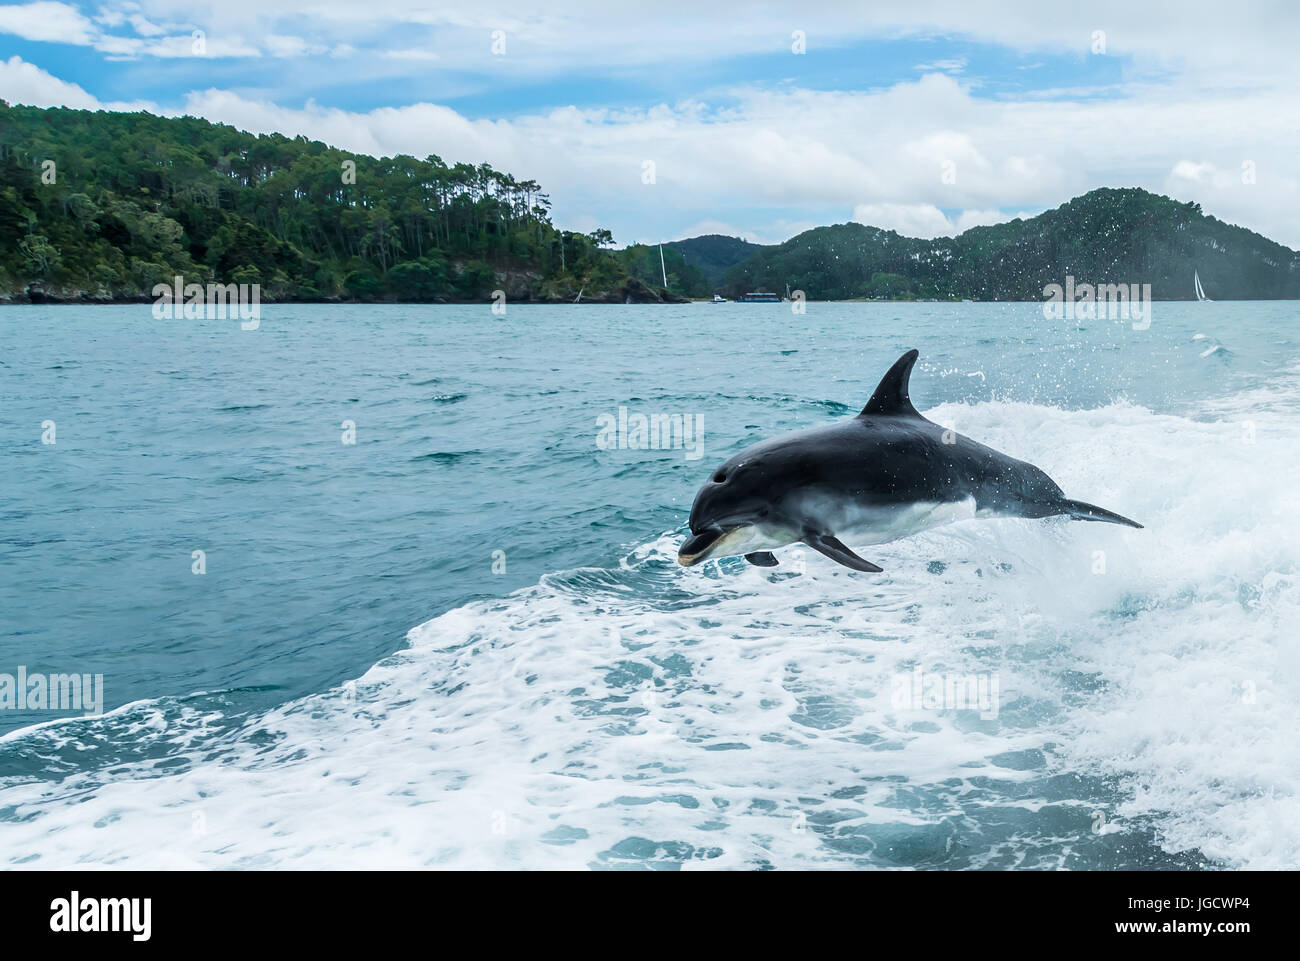 Dolphin jumping out of the ocean in the wake of a boat, Bay of Islands, North Island, New Zealand Stock Photo